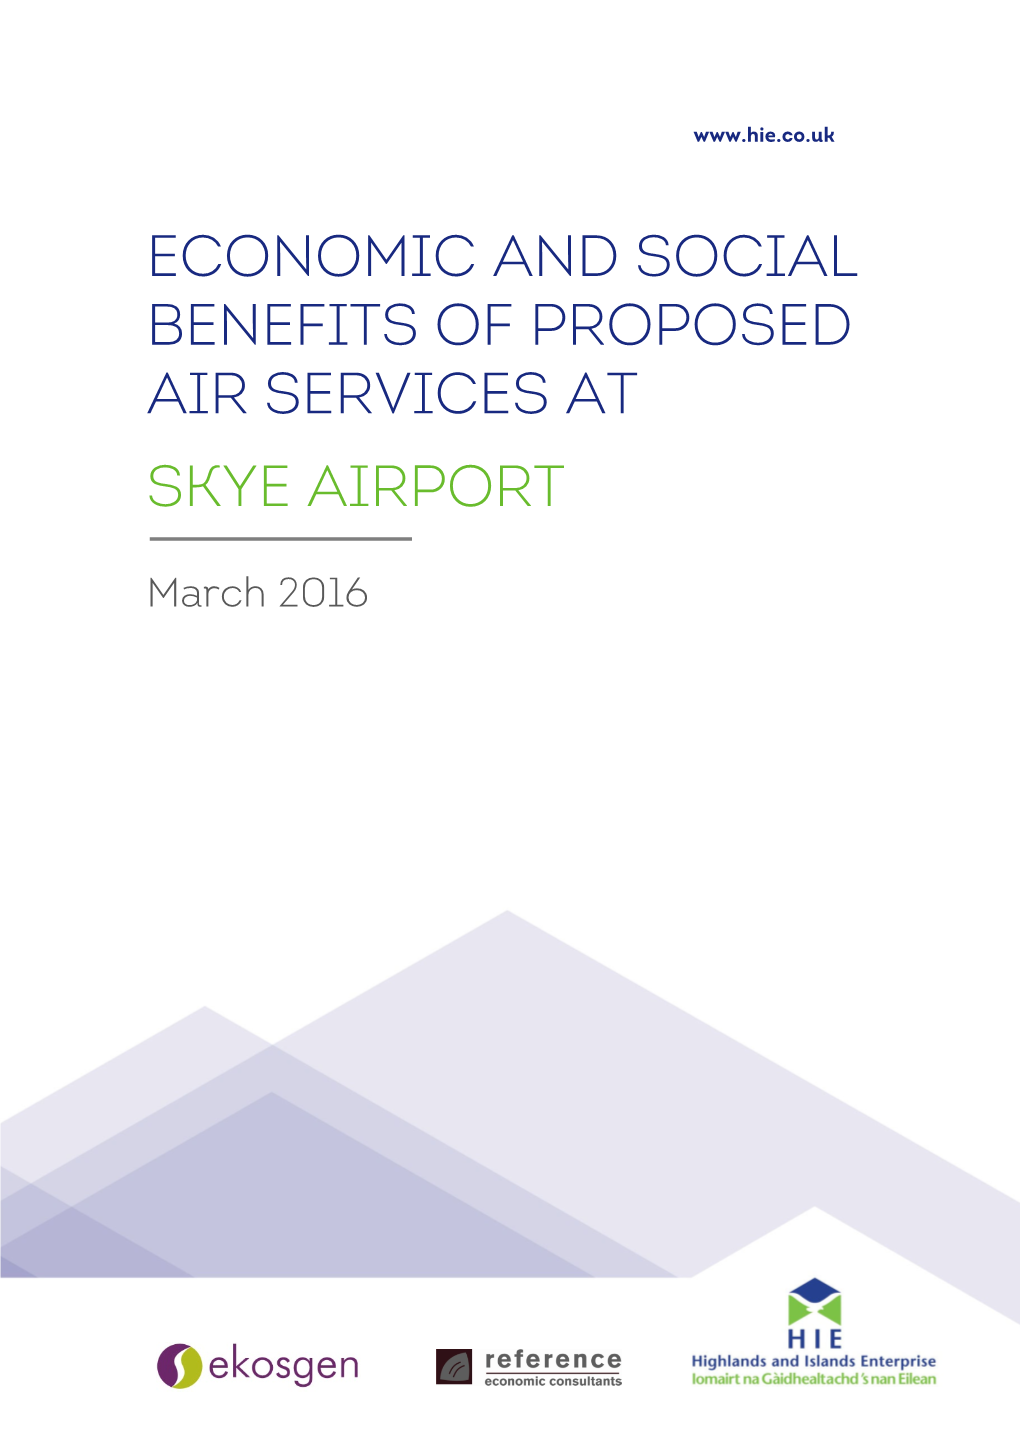 Economic and Social Benefits of Proposed Air Services at Skye Airport